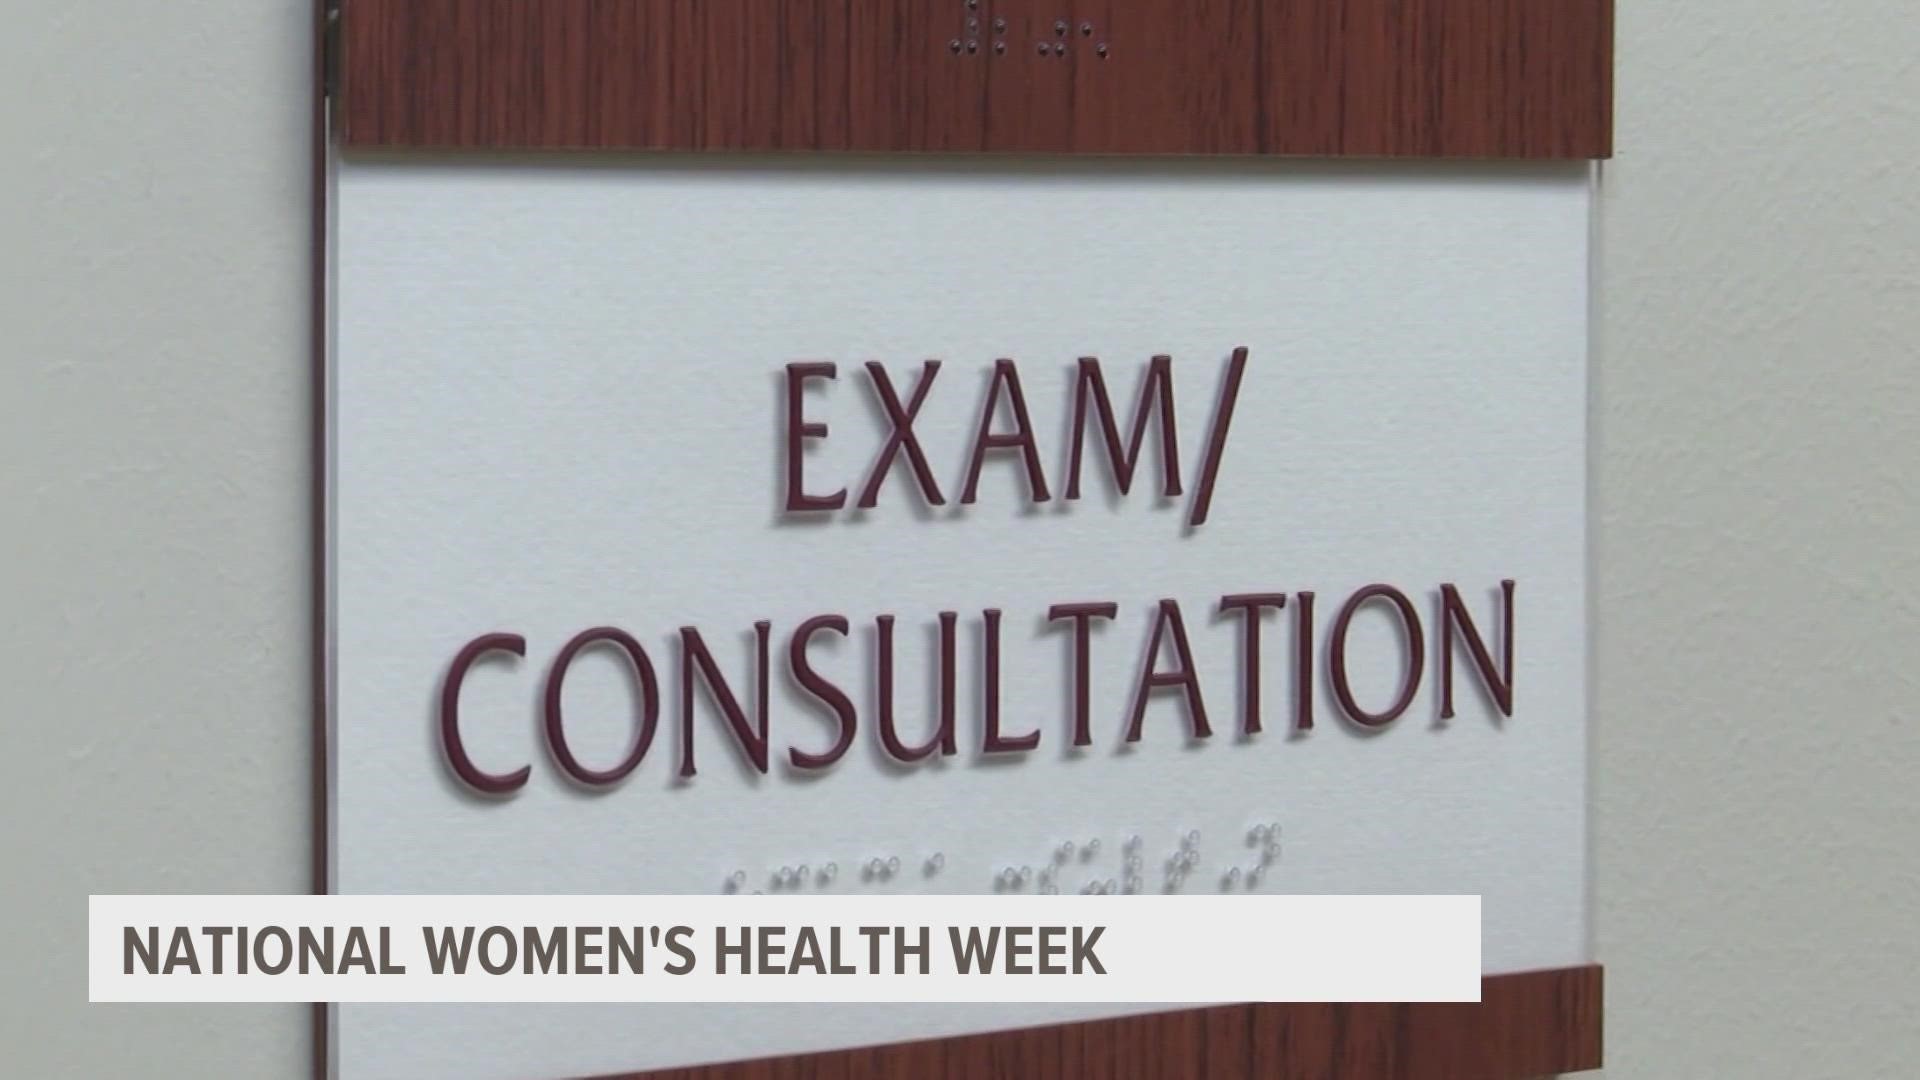 A local group is asking women to pay more attention to their health this week for National Women's Health Week and holding classes to help them better their lives.